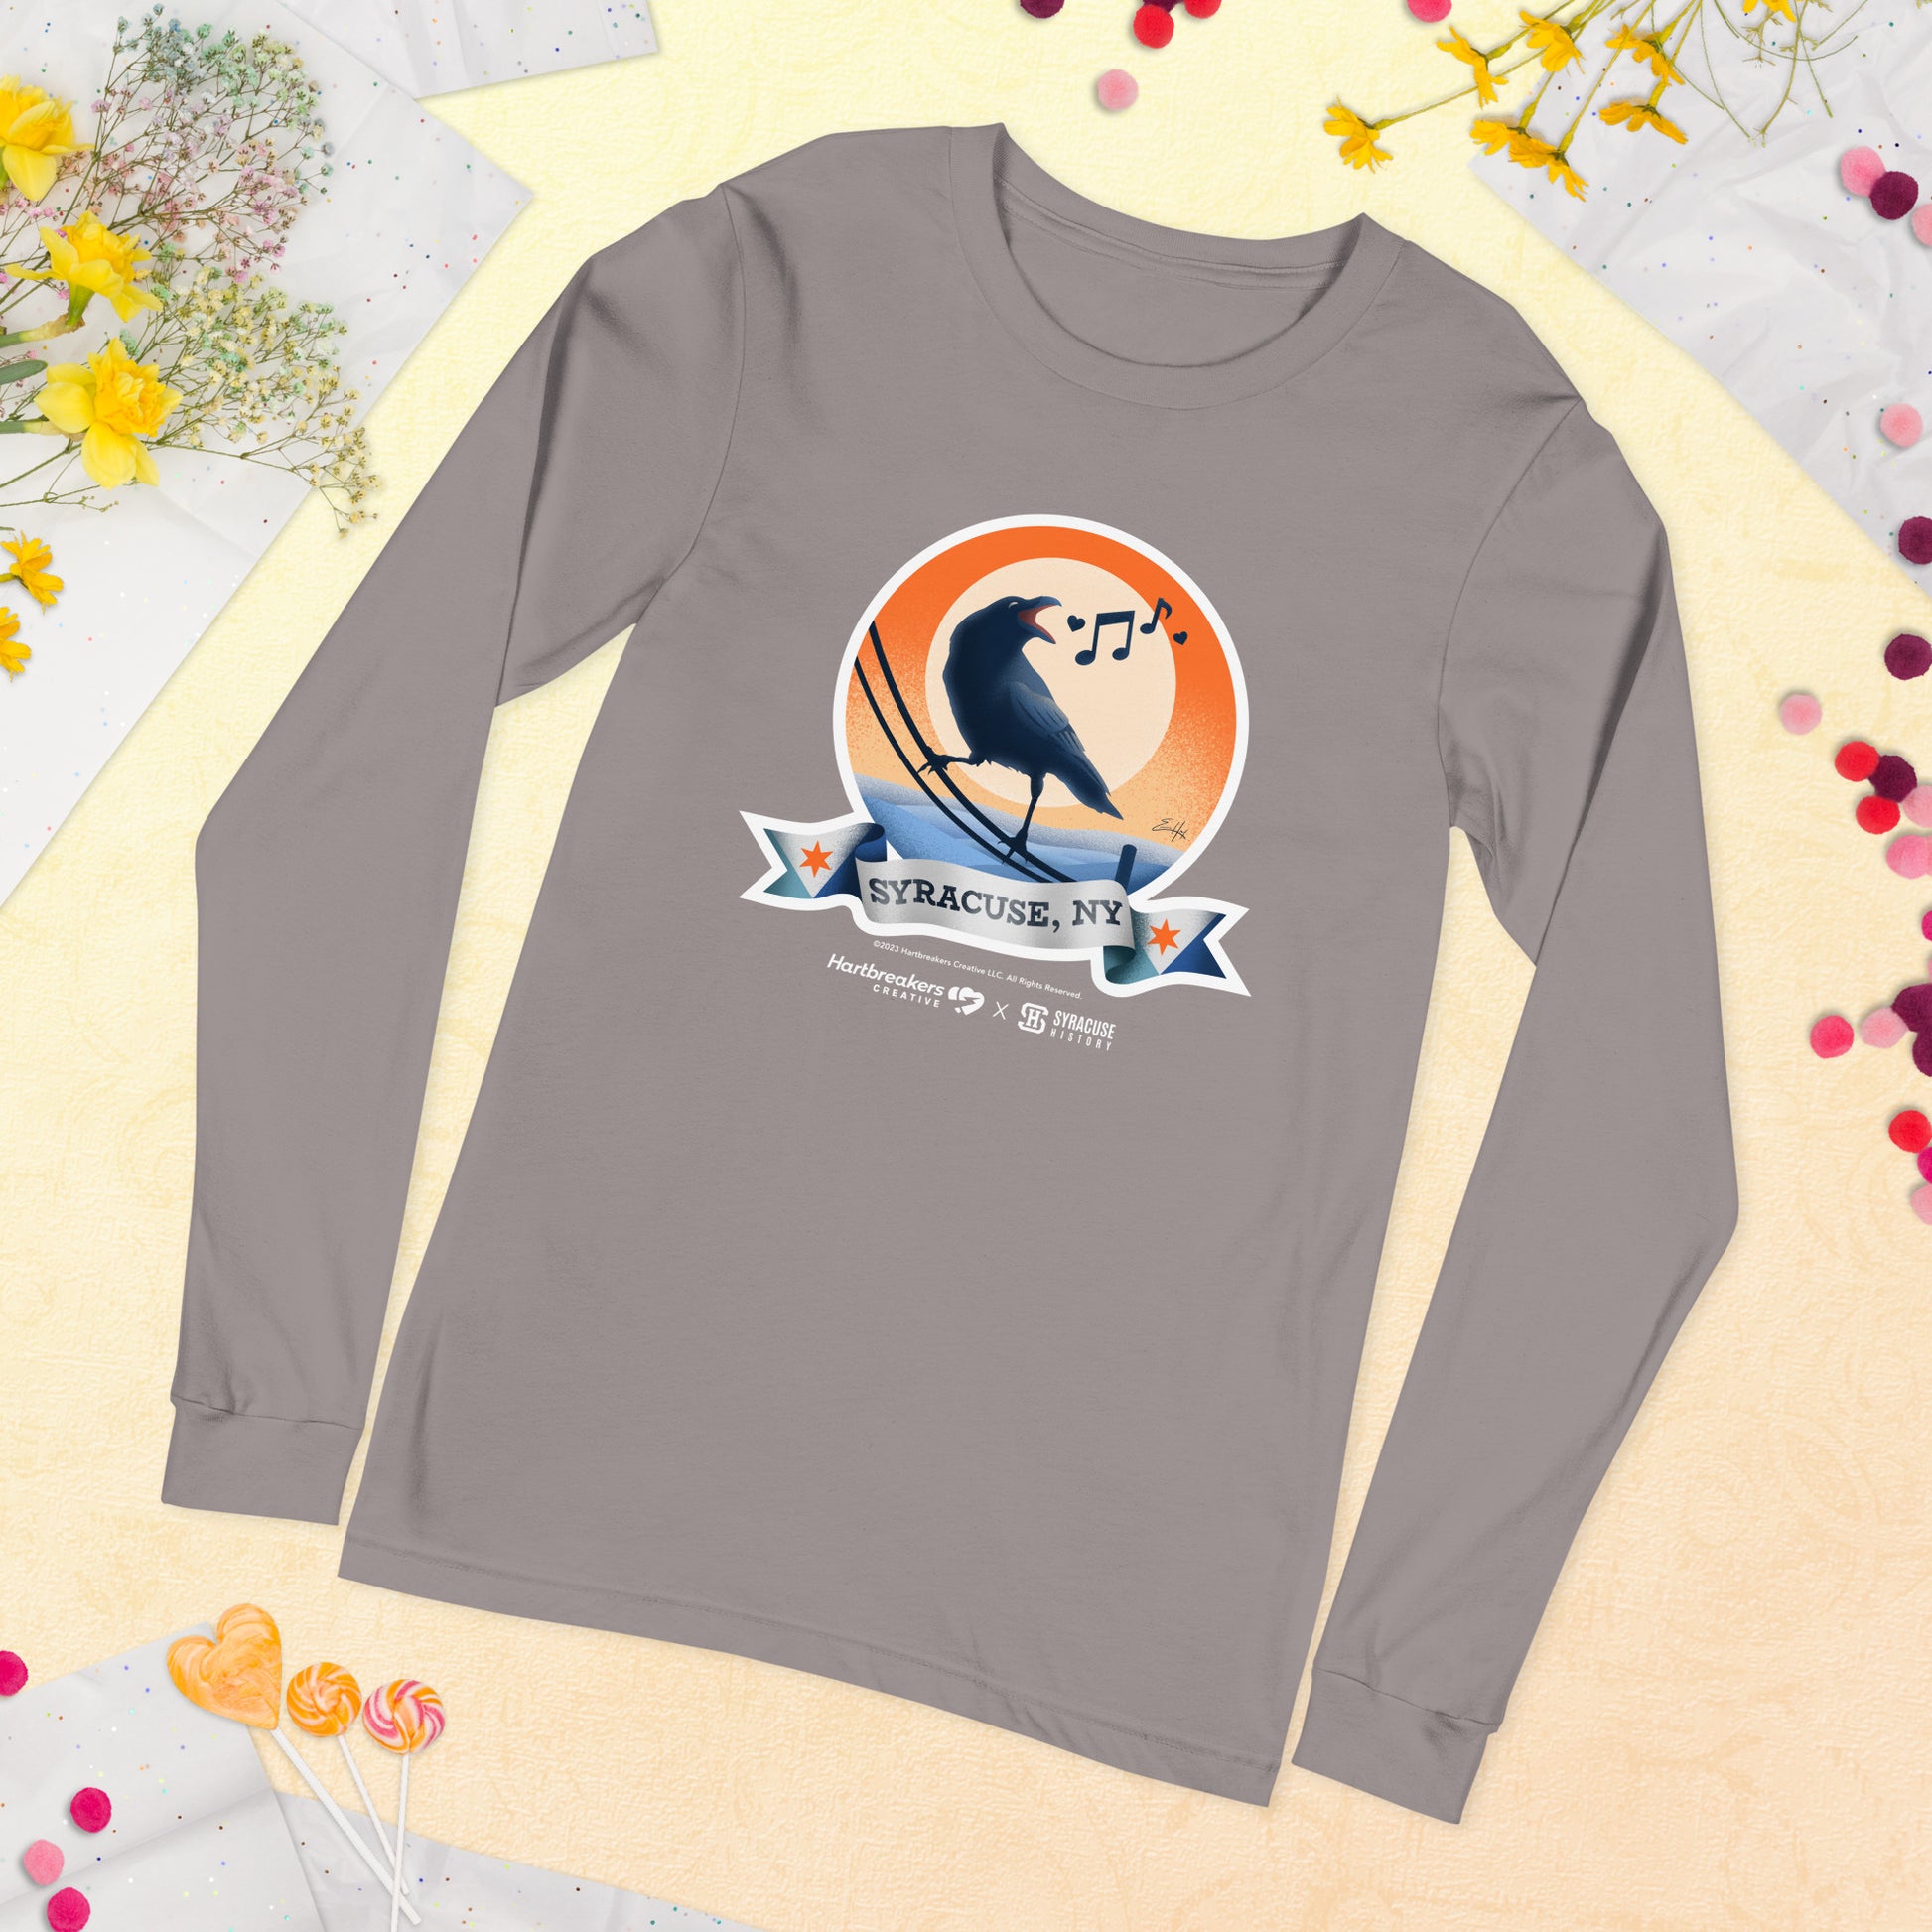 A storm-colored long sleeve T-shirt featuring an illustration of a crow on a telephone wire and a banner beneath it that says Syracuse, NY